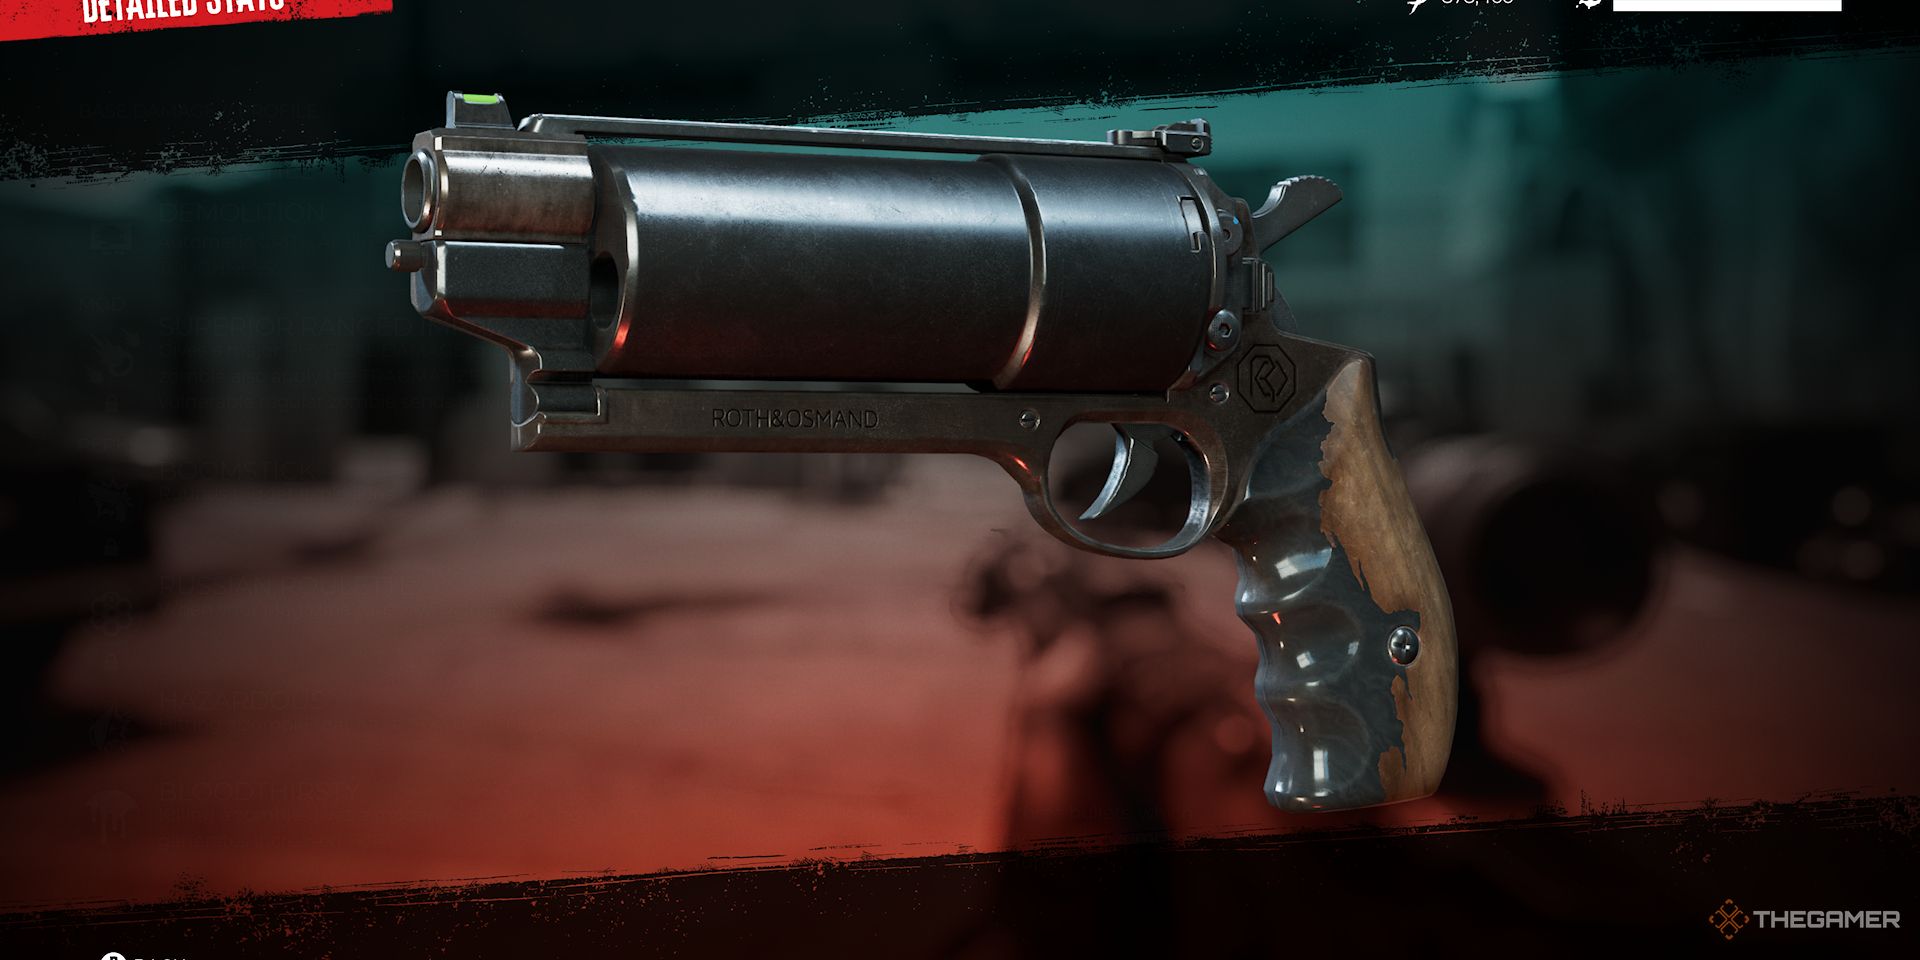 A close shot of the Big Shot Legendary Weapon in Dead Island 2.